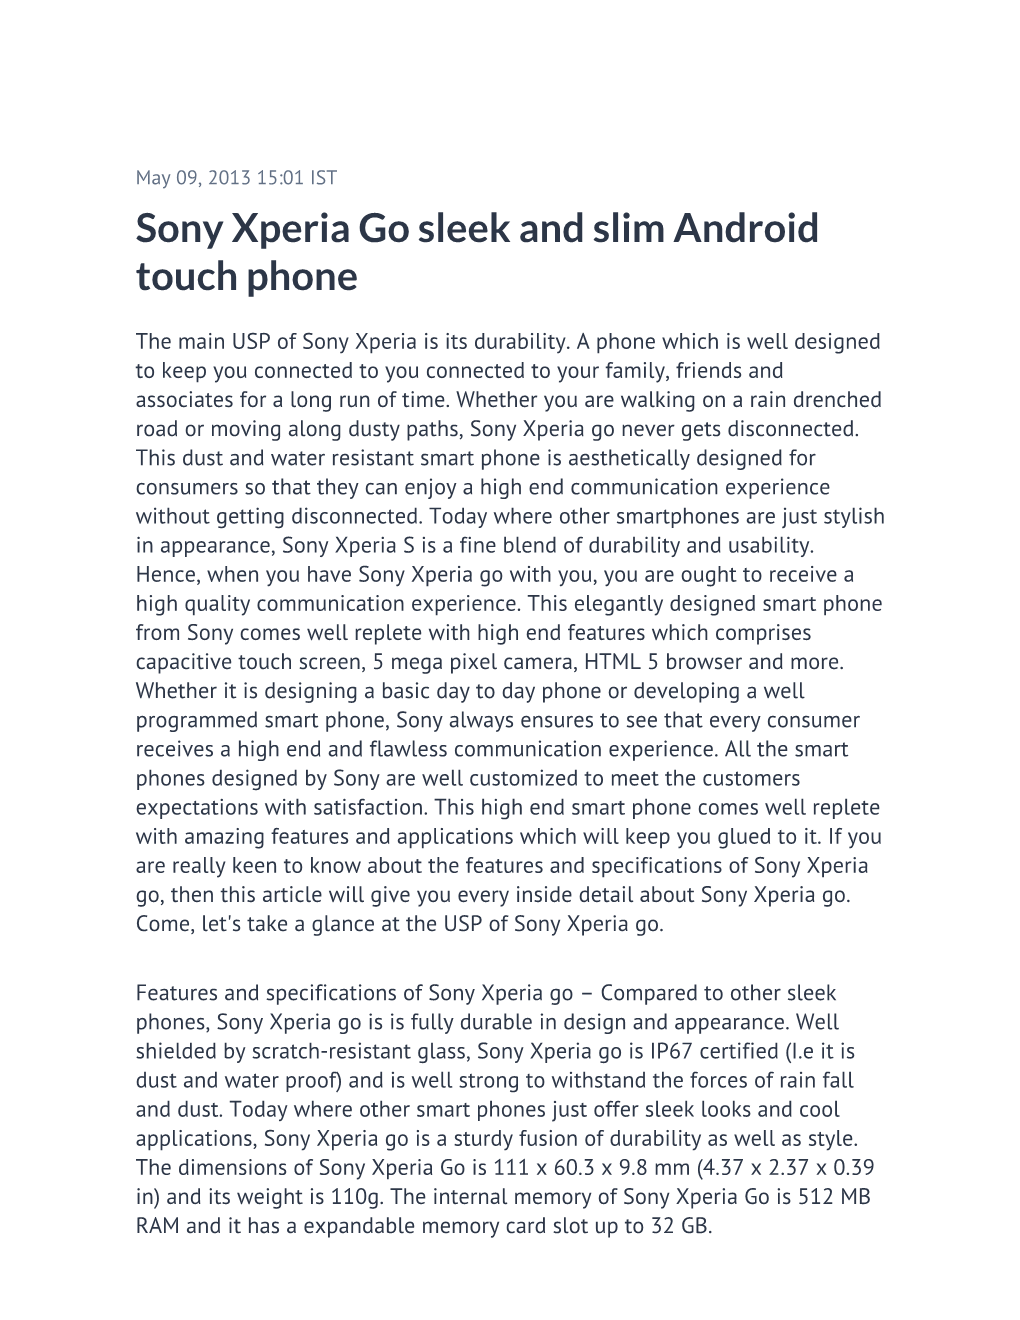 Sony Xperia Go Sleek and Slim Android Touch Phone